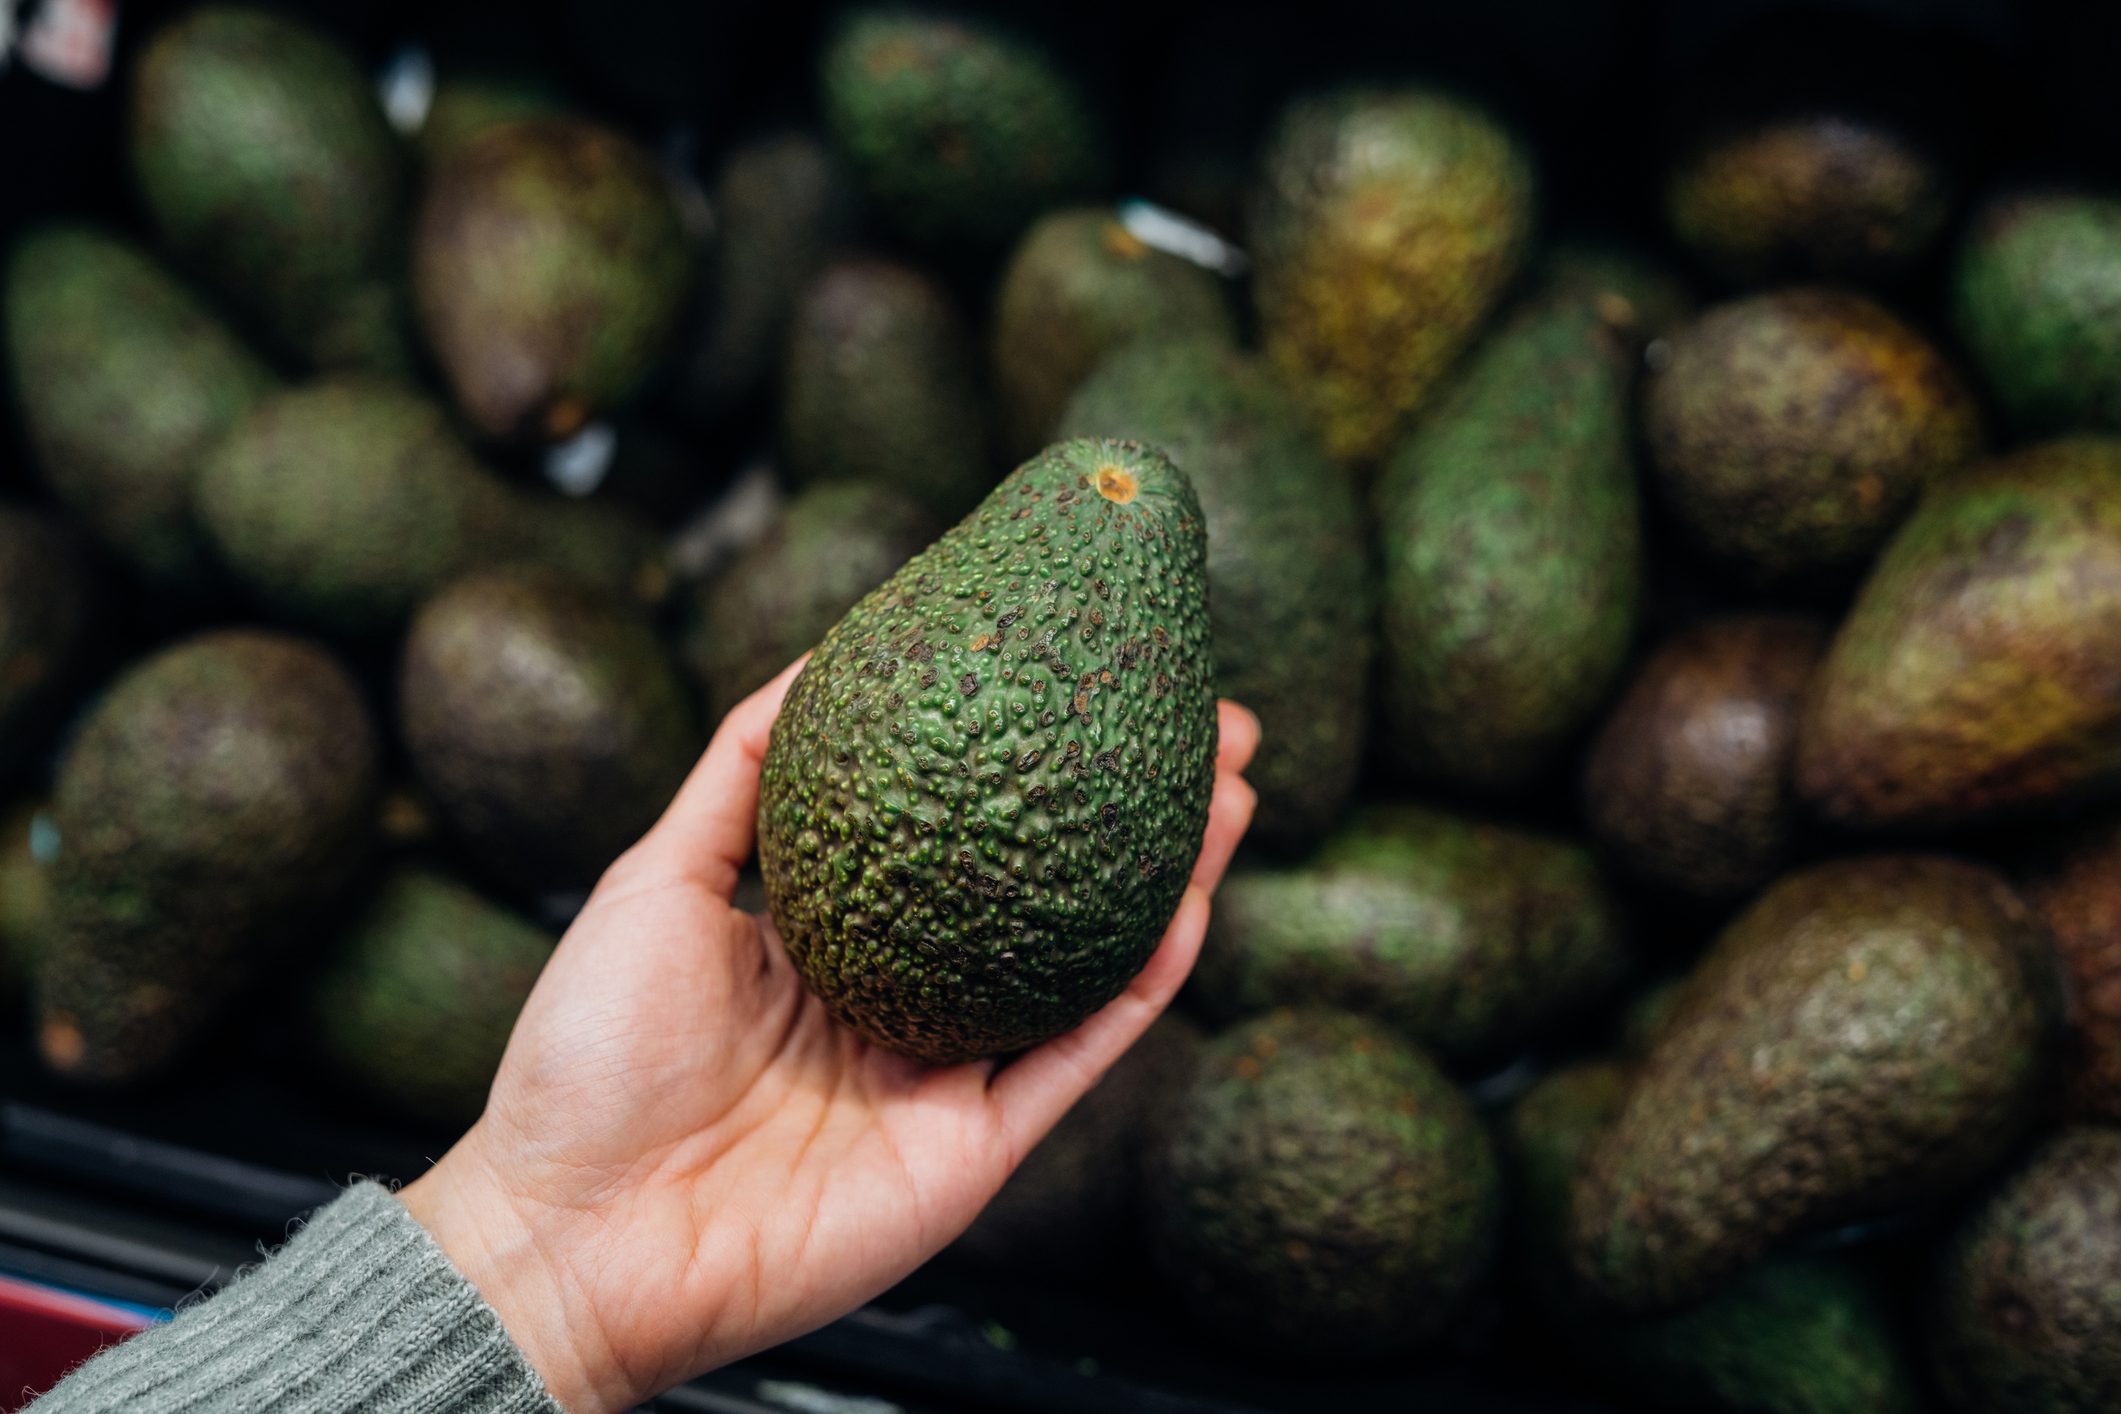 Is there a 'right' way to slice an avocado?